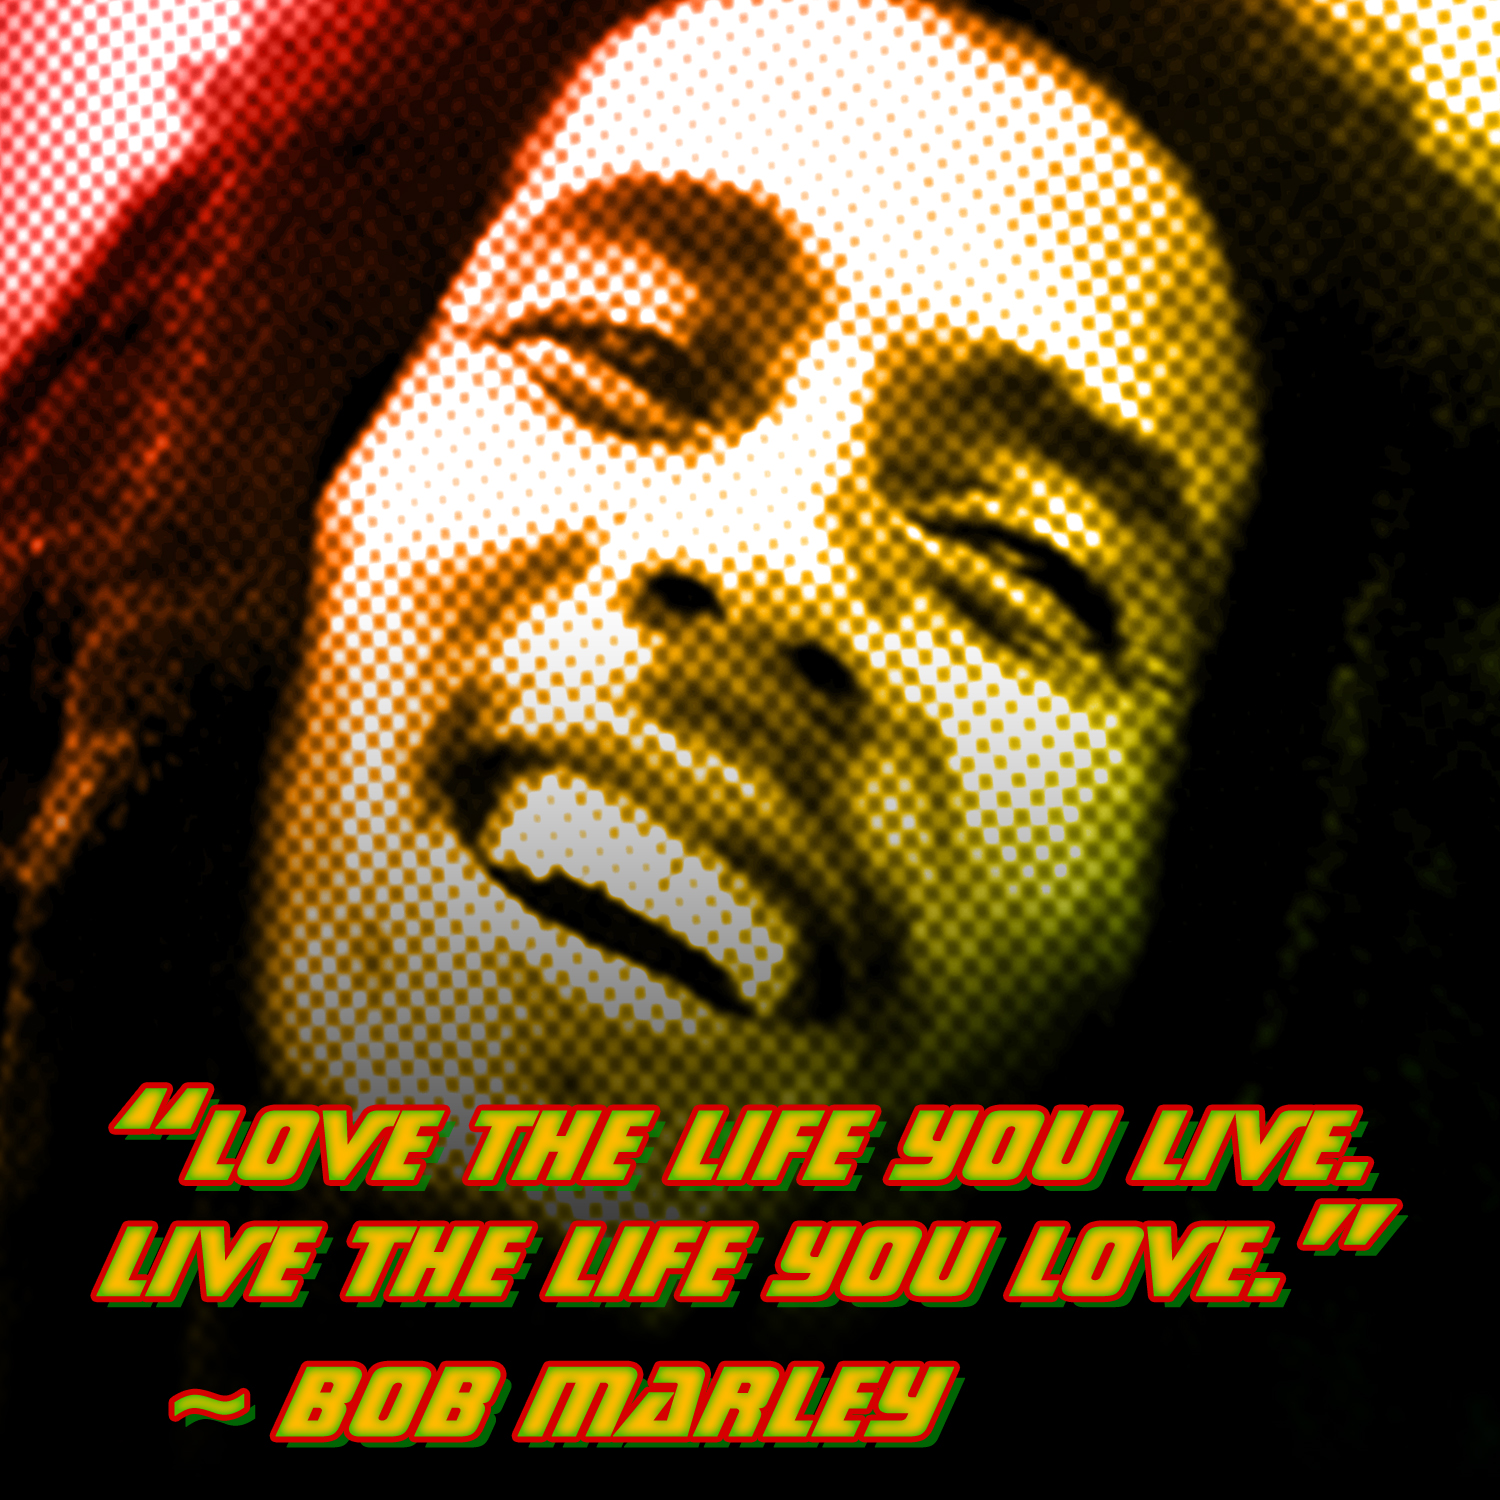 Bob Marley Quote - Bob Marley Picture Download - HD Wallpaper 